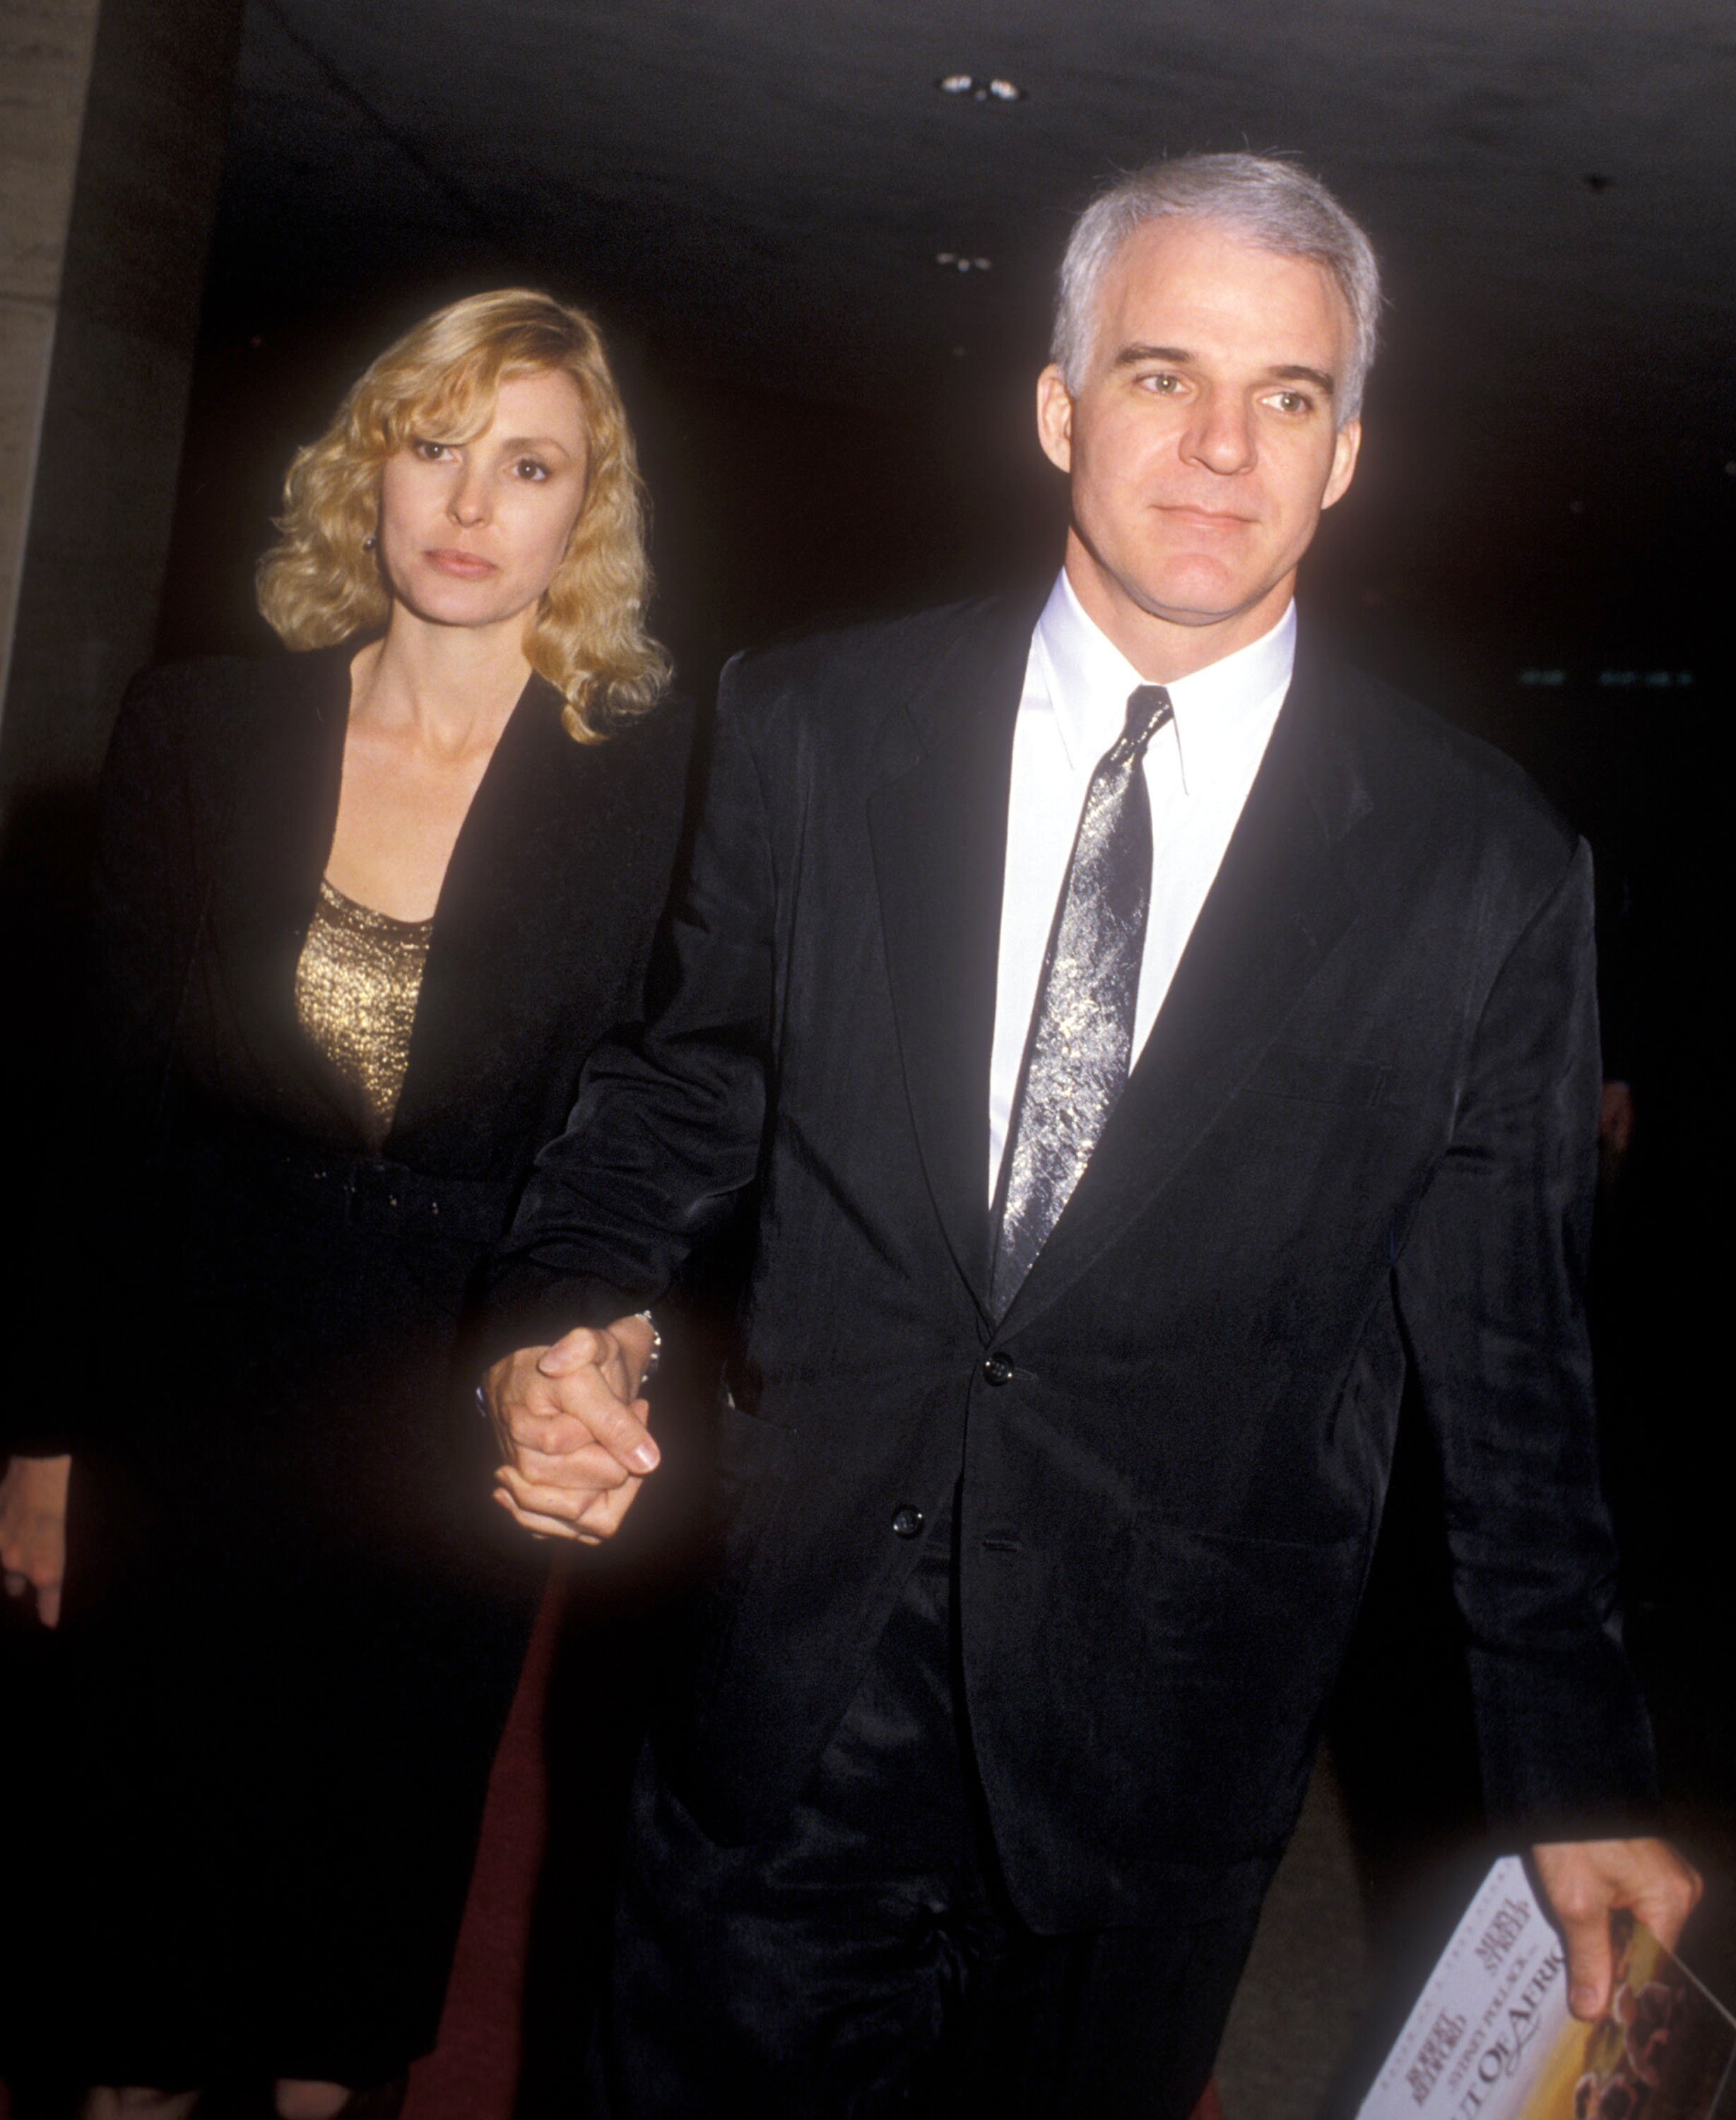 Victoria Tennant and Steve Martin at the "Out Of Africa" Los Angeles premiere at Plitt Theater in Century City, California, United States. | Source: Getty Images